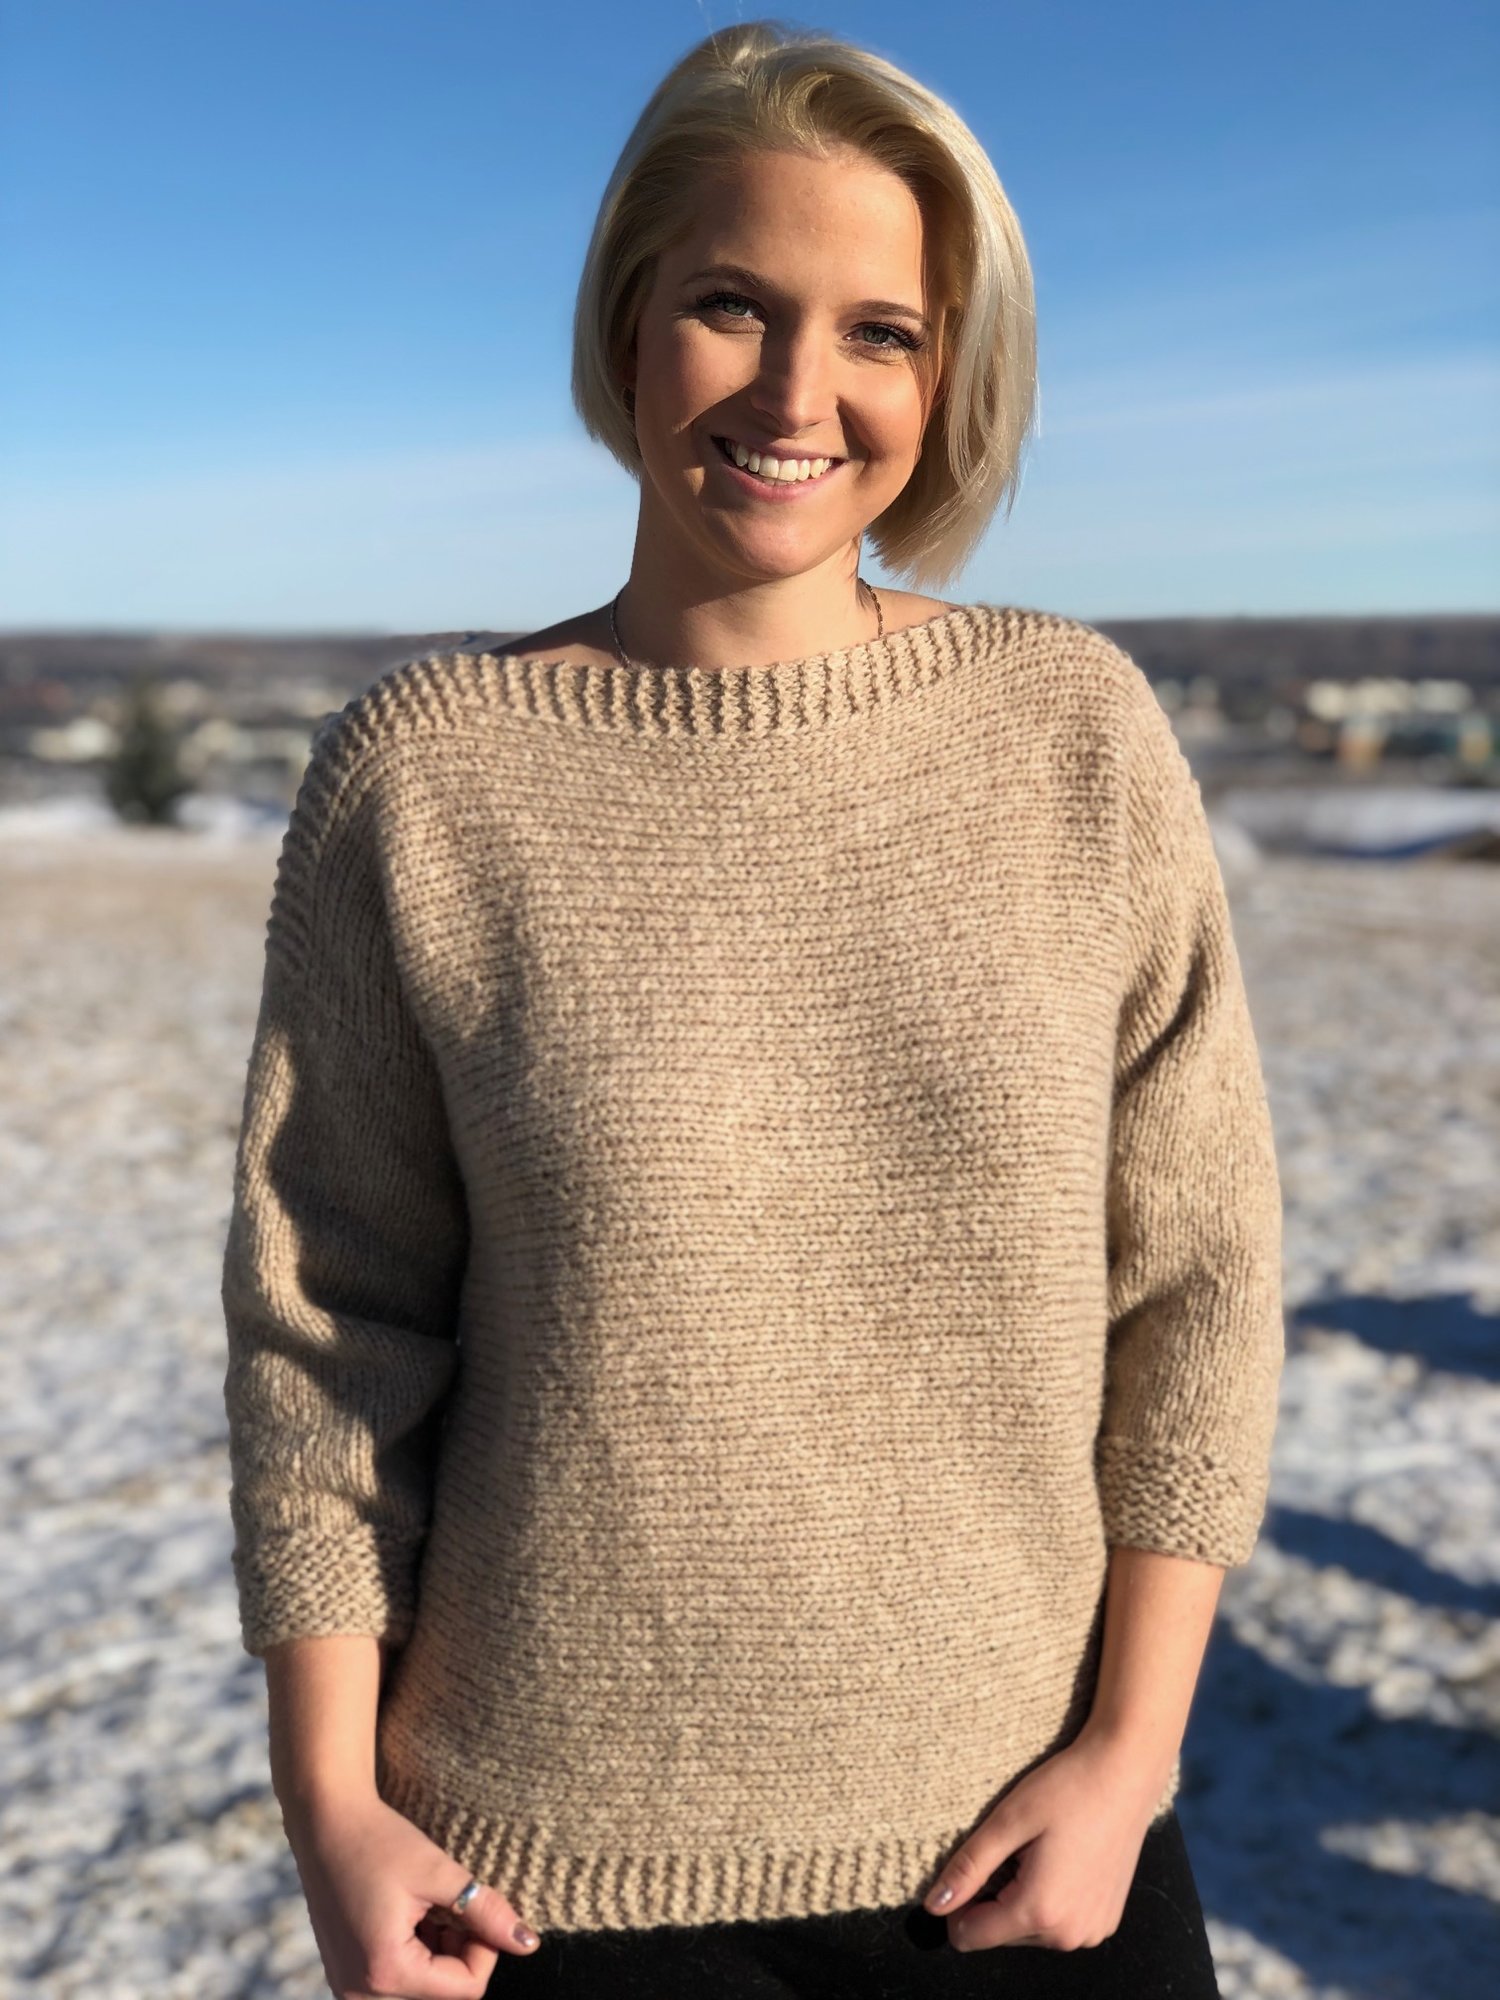 THE COURSE OF THE CROSSBACK SWEATER — Knitatude